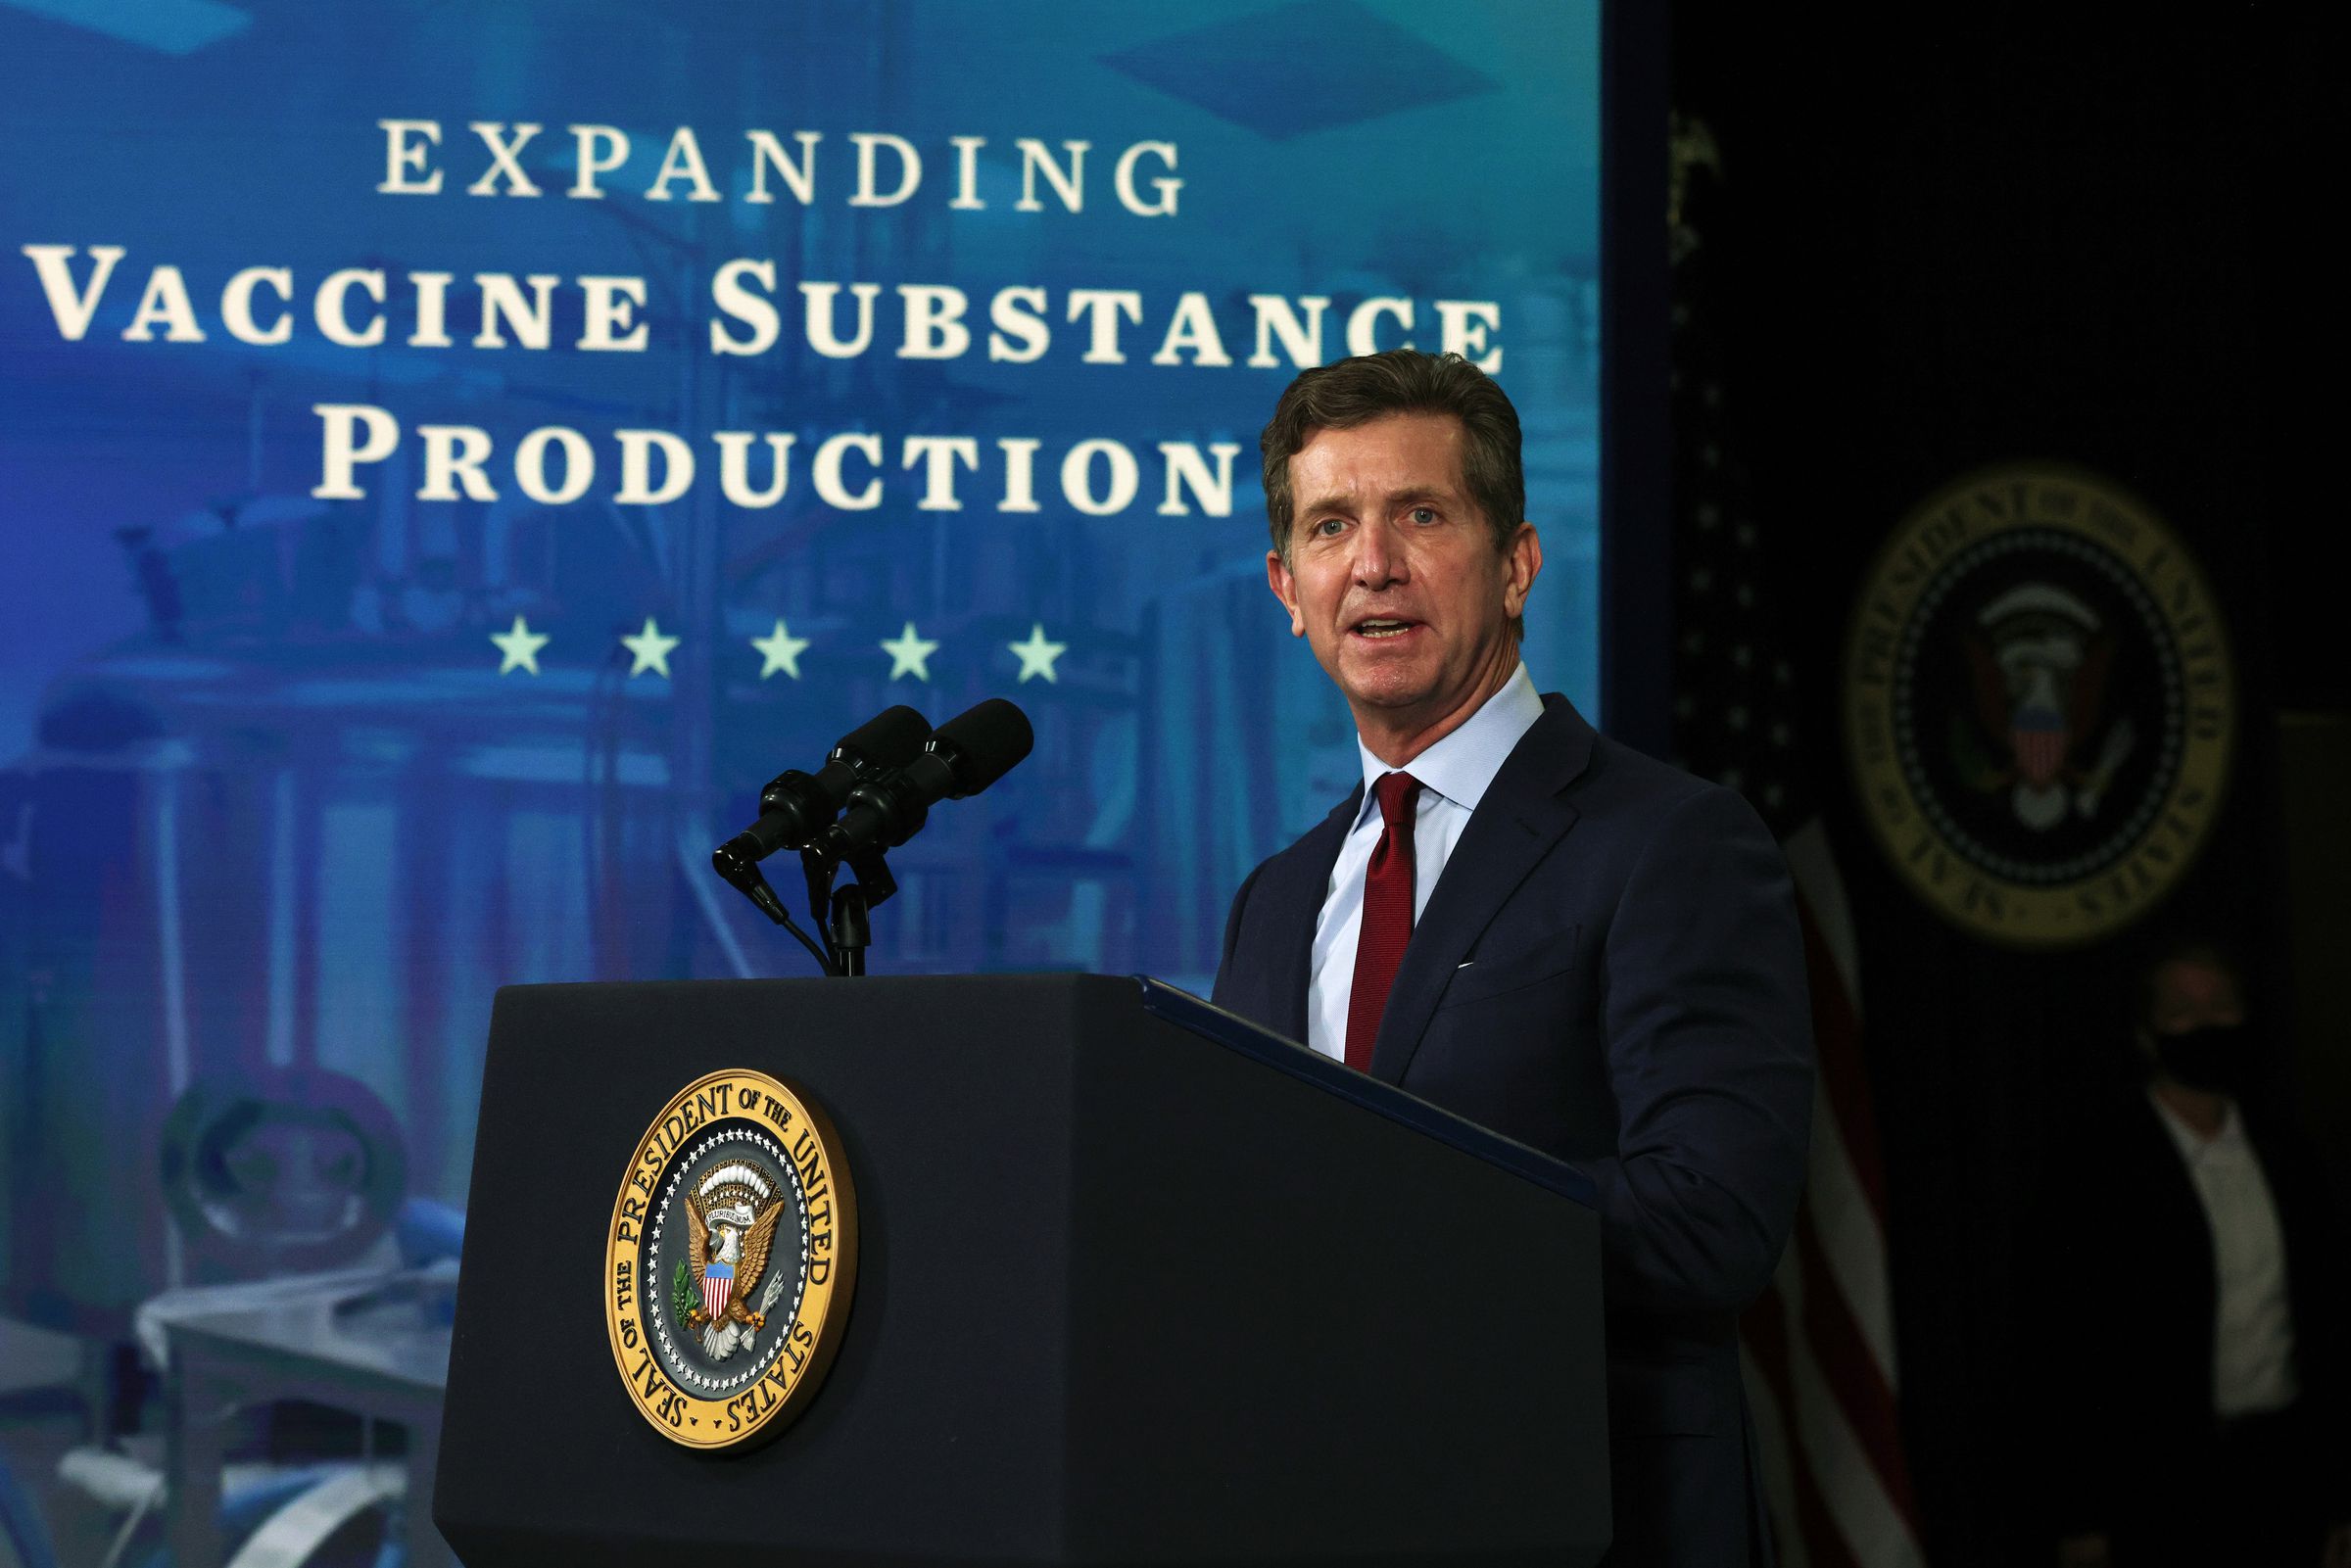 Chairman and CEO of Johnson &amp; Johnson Alex Gorsky speaks during an event at the South Court Auditorium of the Eisenhower Executive Office Building March 10, 2021 in Washington, DC.